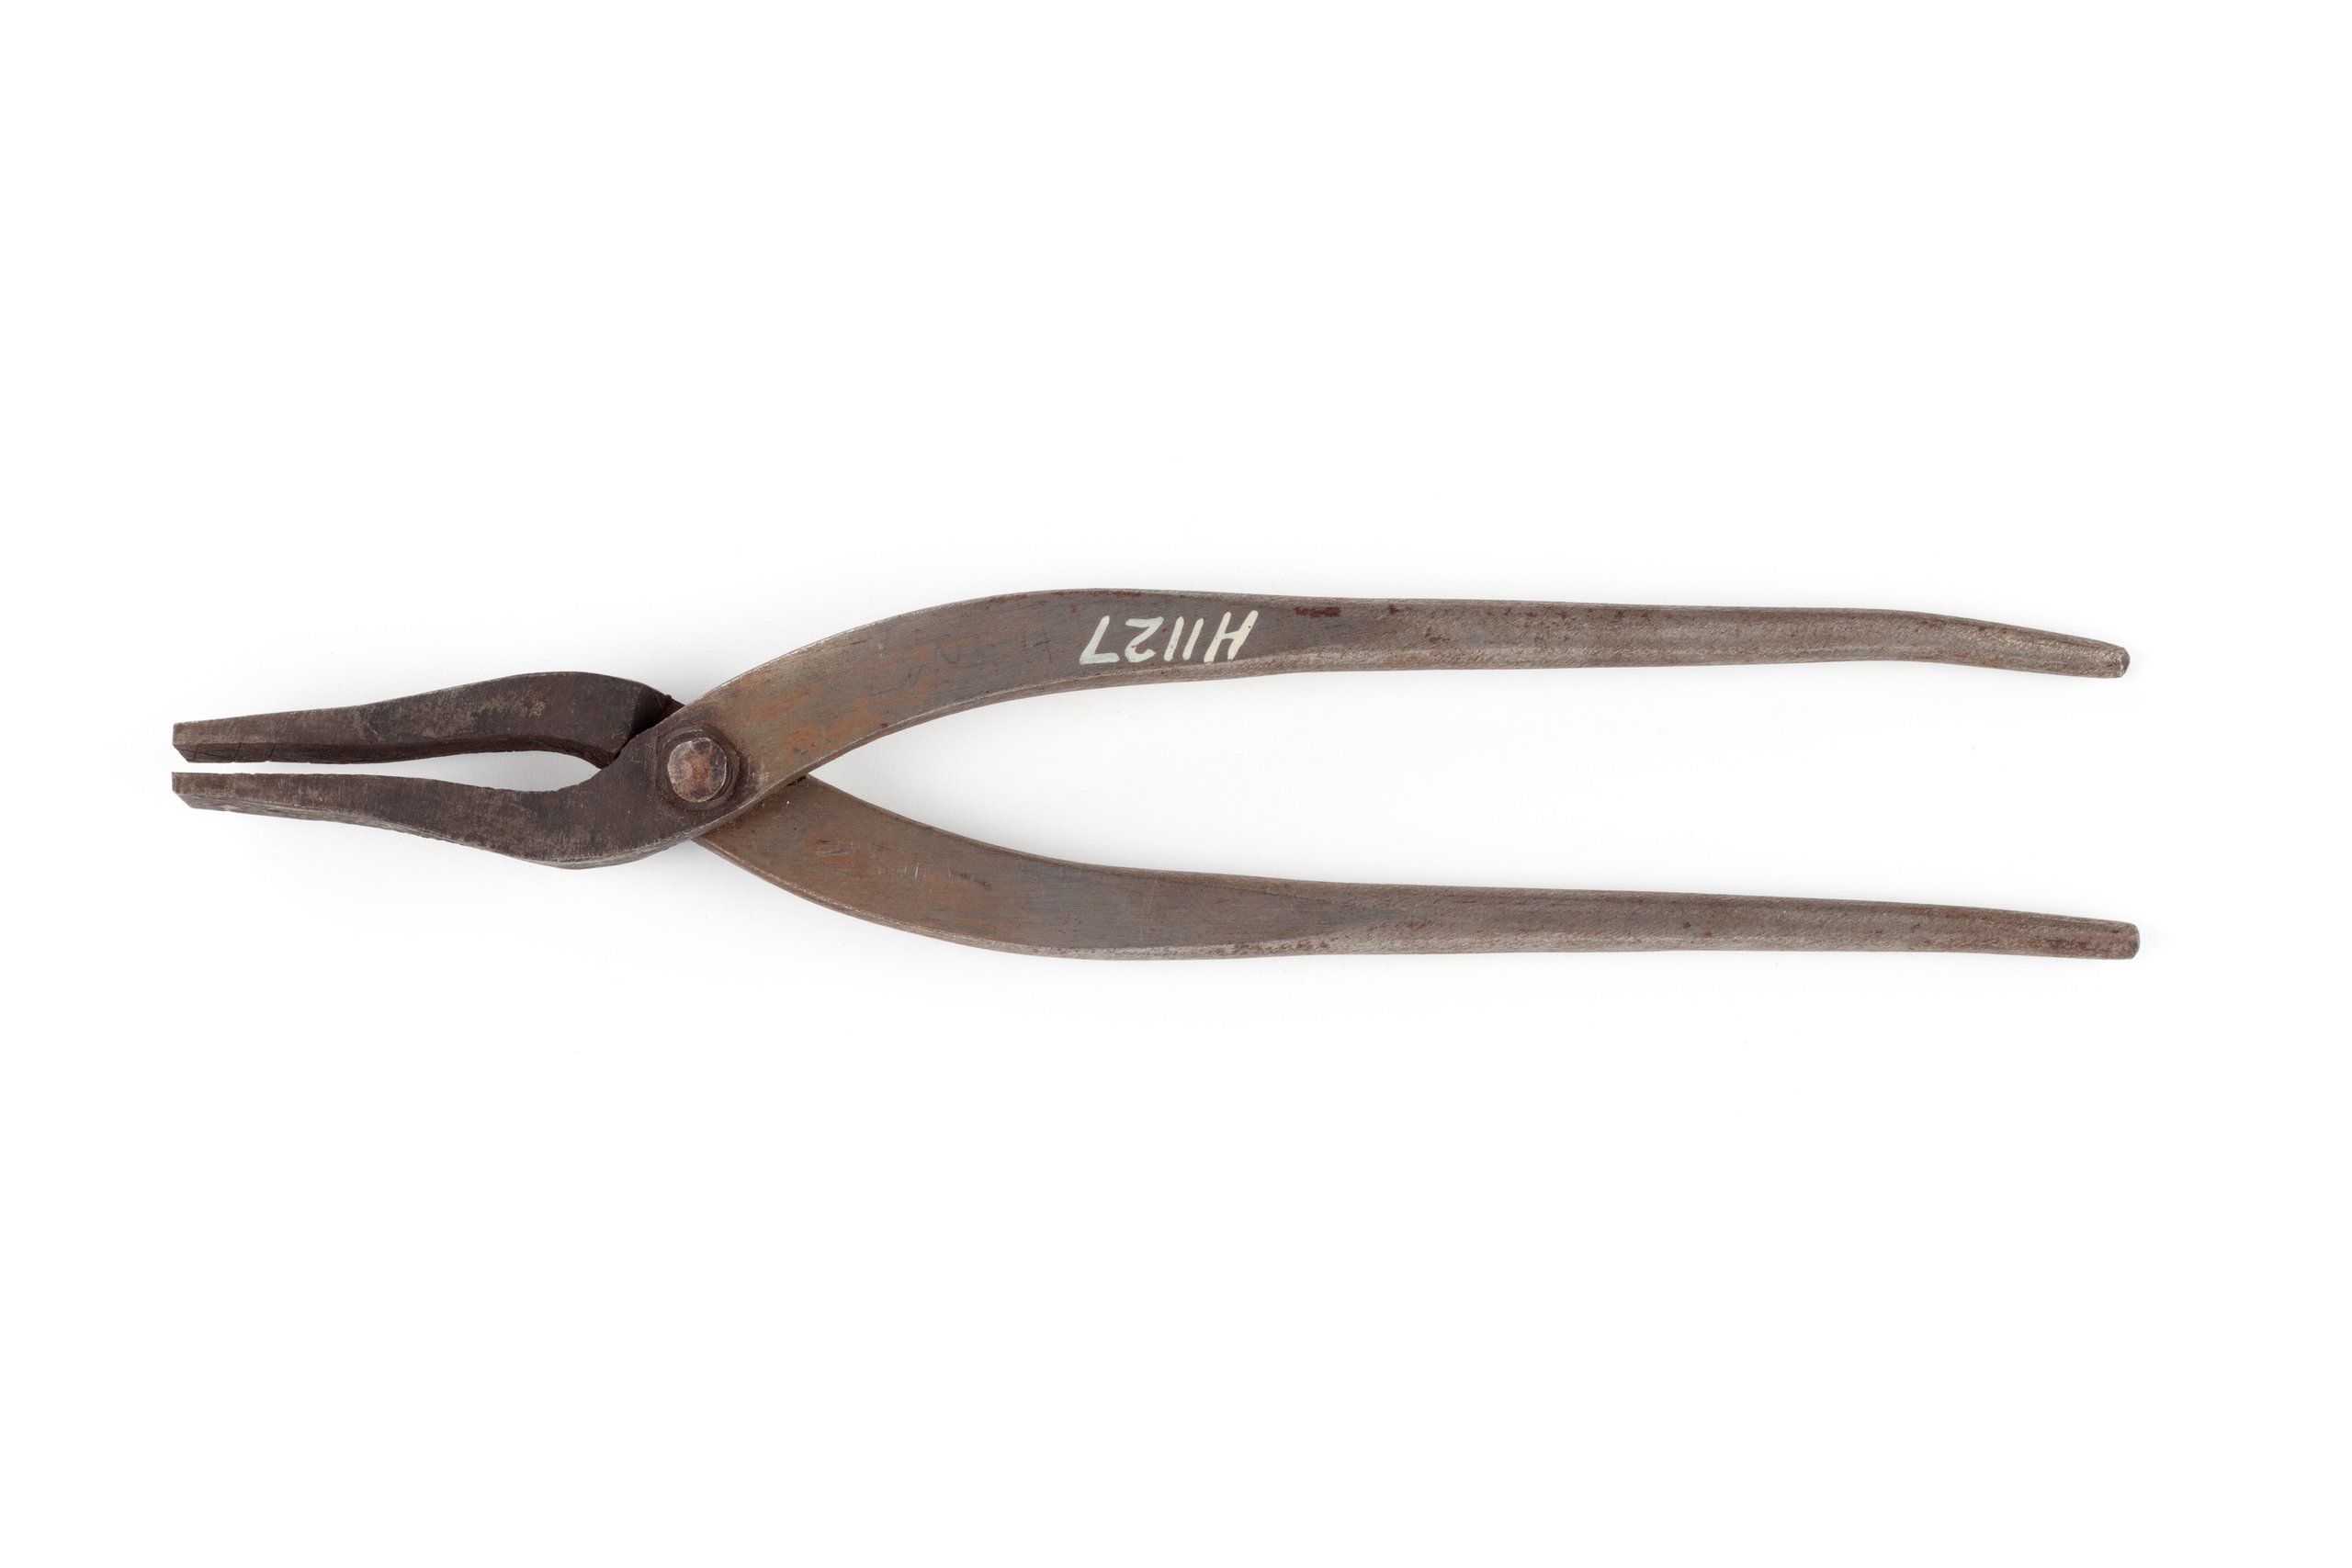 Tailor's tongs